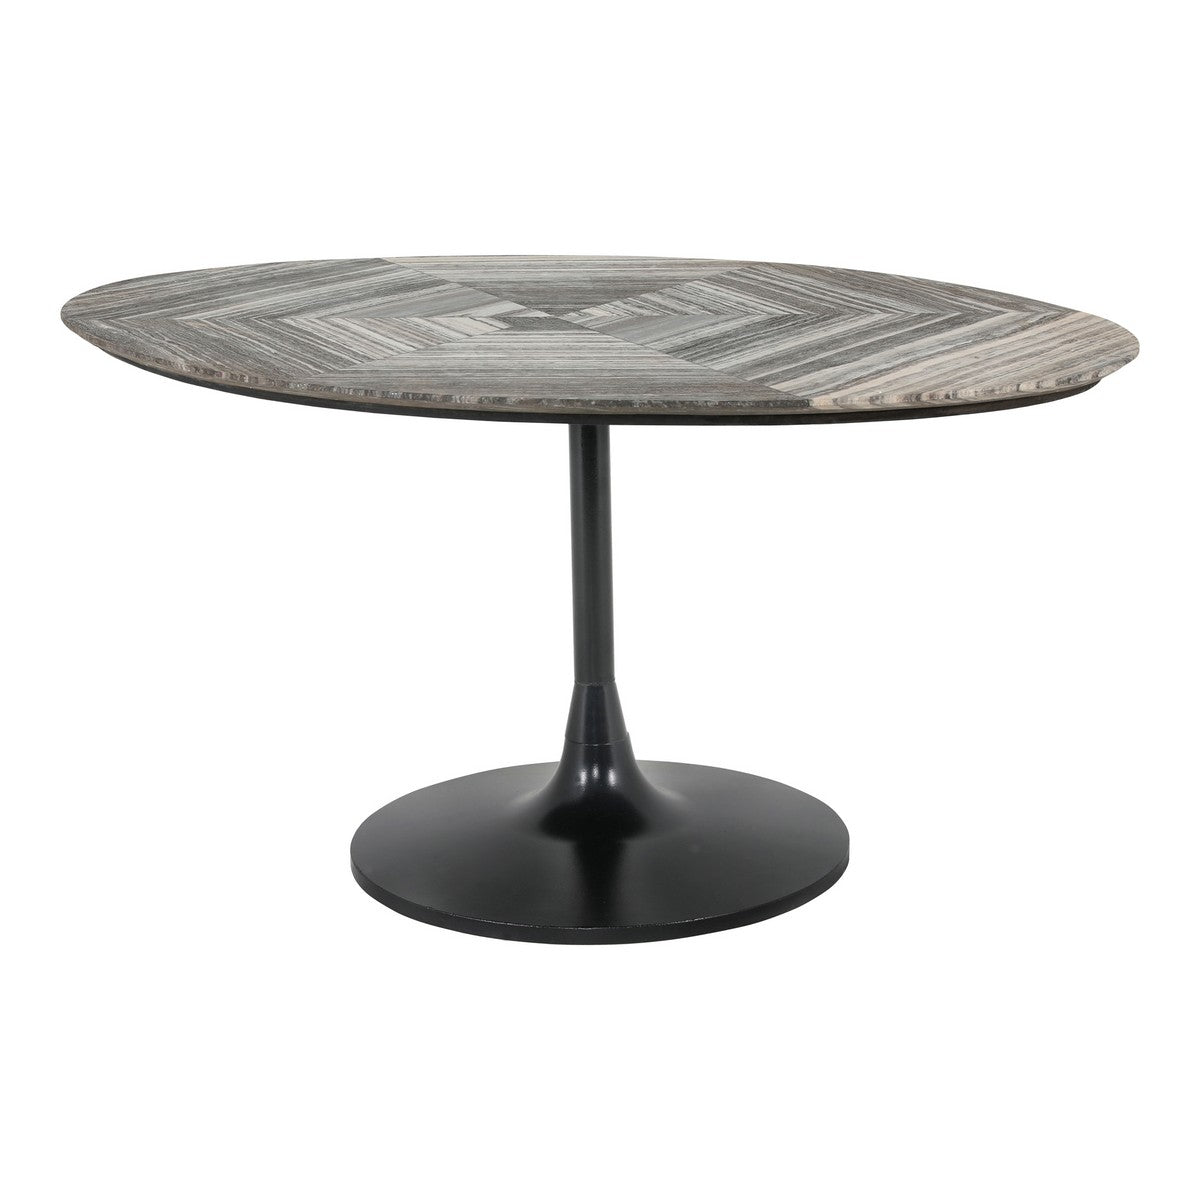 Moe's Home Collection Nyles Oval Marble Dining Table - GK-1114-37